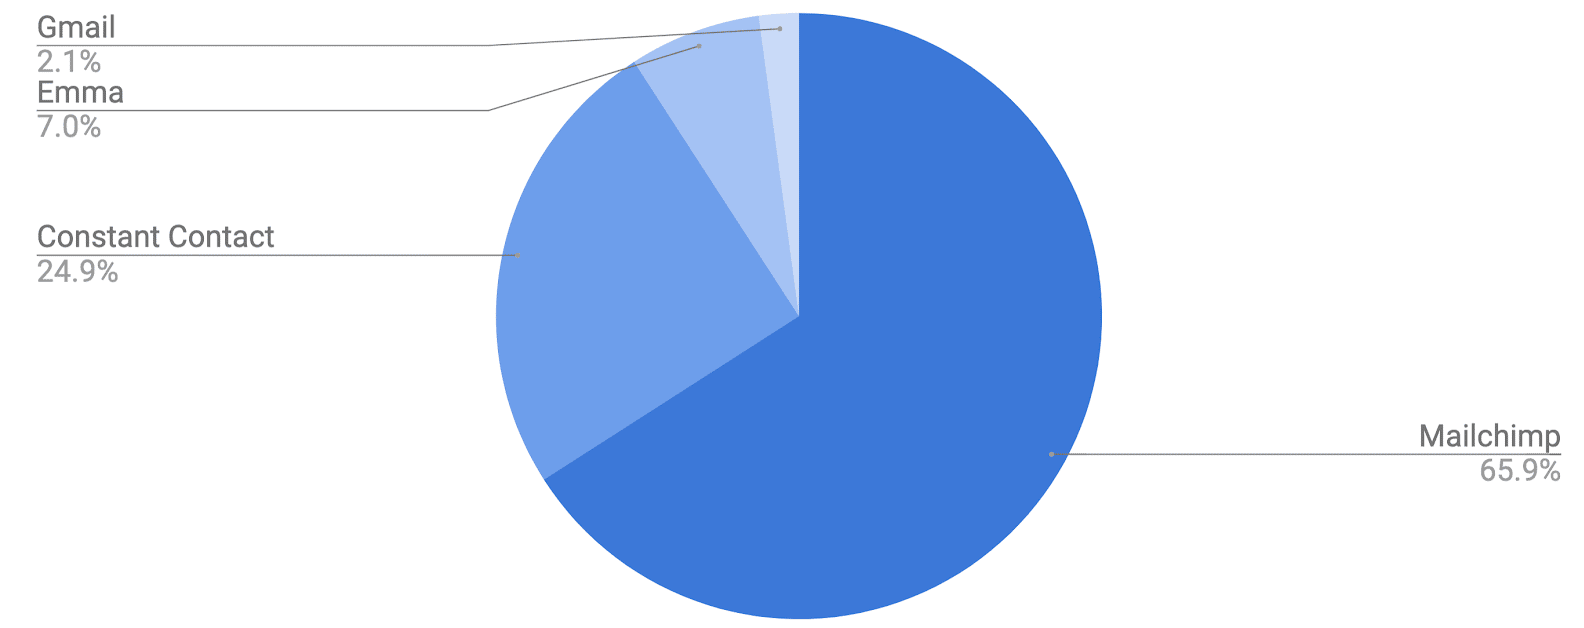 Pie chart showing data for the best and most popular email marketing software for nonprofits including Gmail, Mailchimp, Constant Contact, and Emma